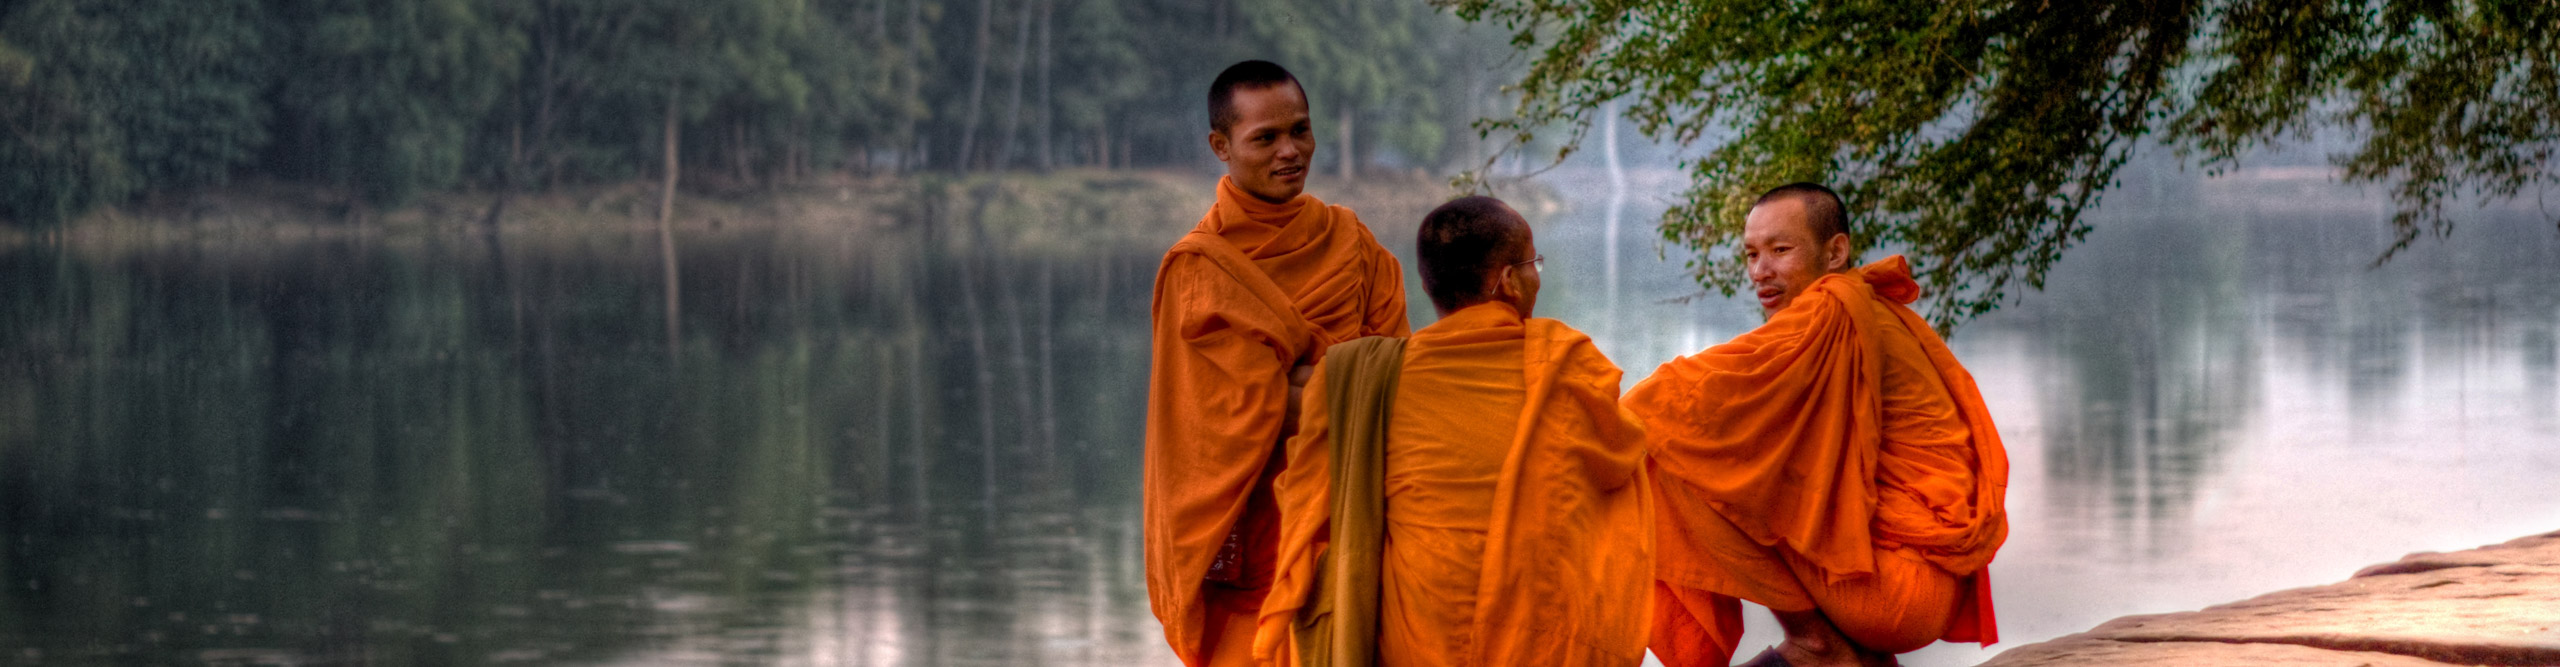 Monks in orange robes talking and laughing by the river at sunset near Siem Reap, Cambodia 